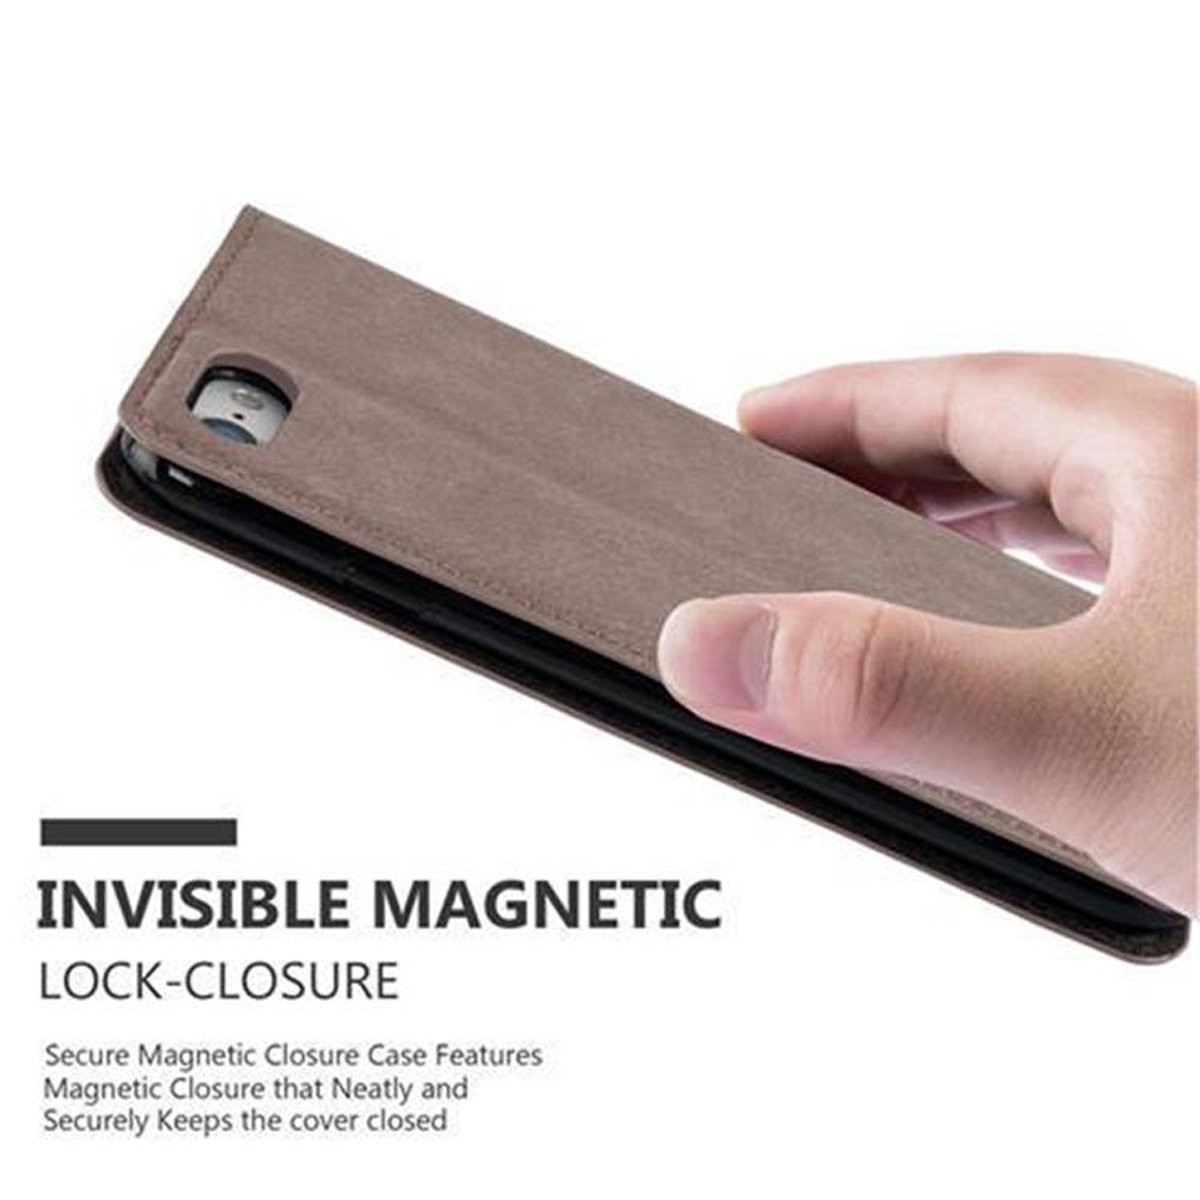 Bookcover, / 7 / Hülle BRAUN Invisible iPhone Book 7S Magnet, SE CADORABO 8 / KAFFEE Apple, 2020,